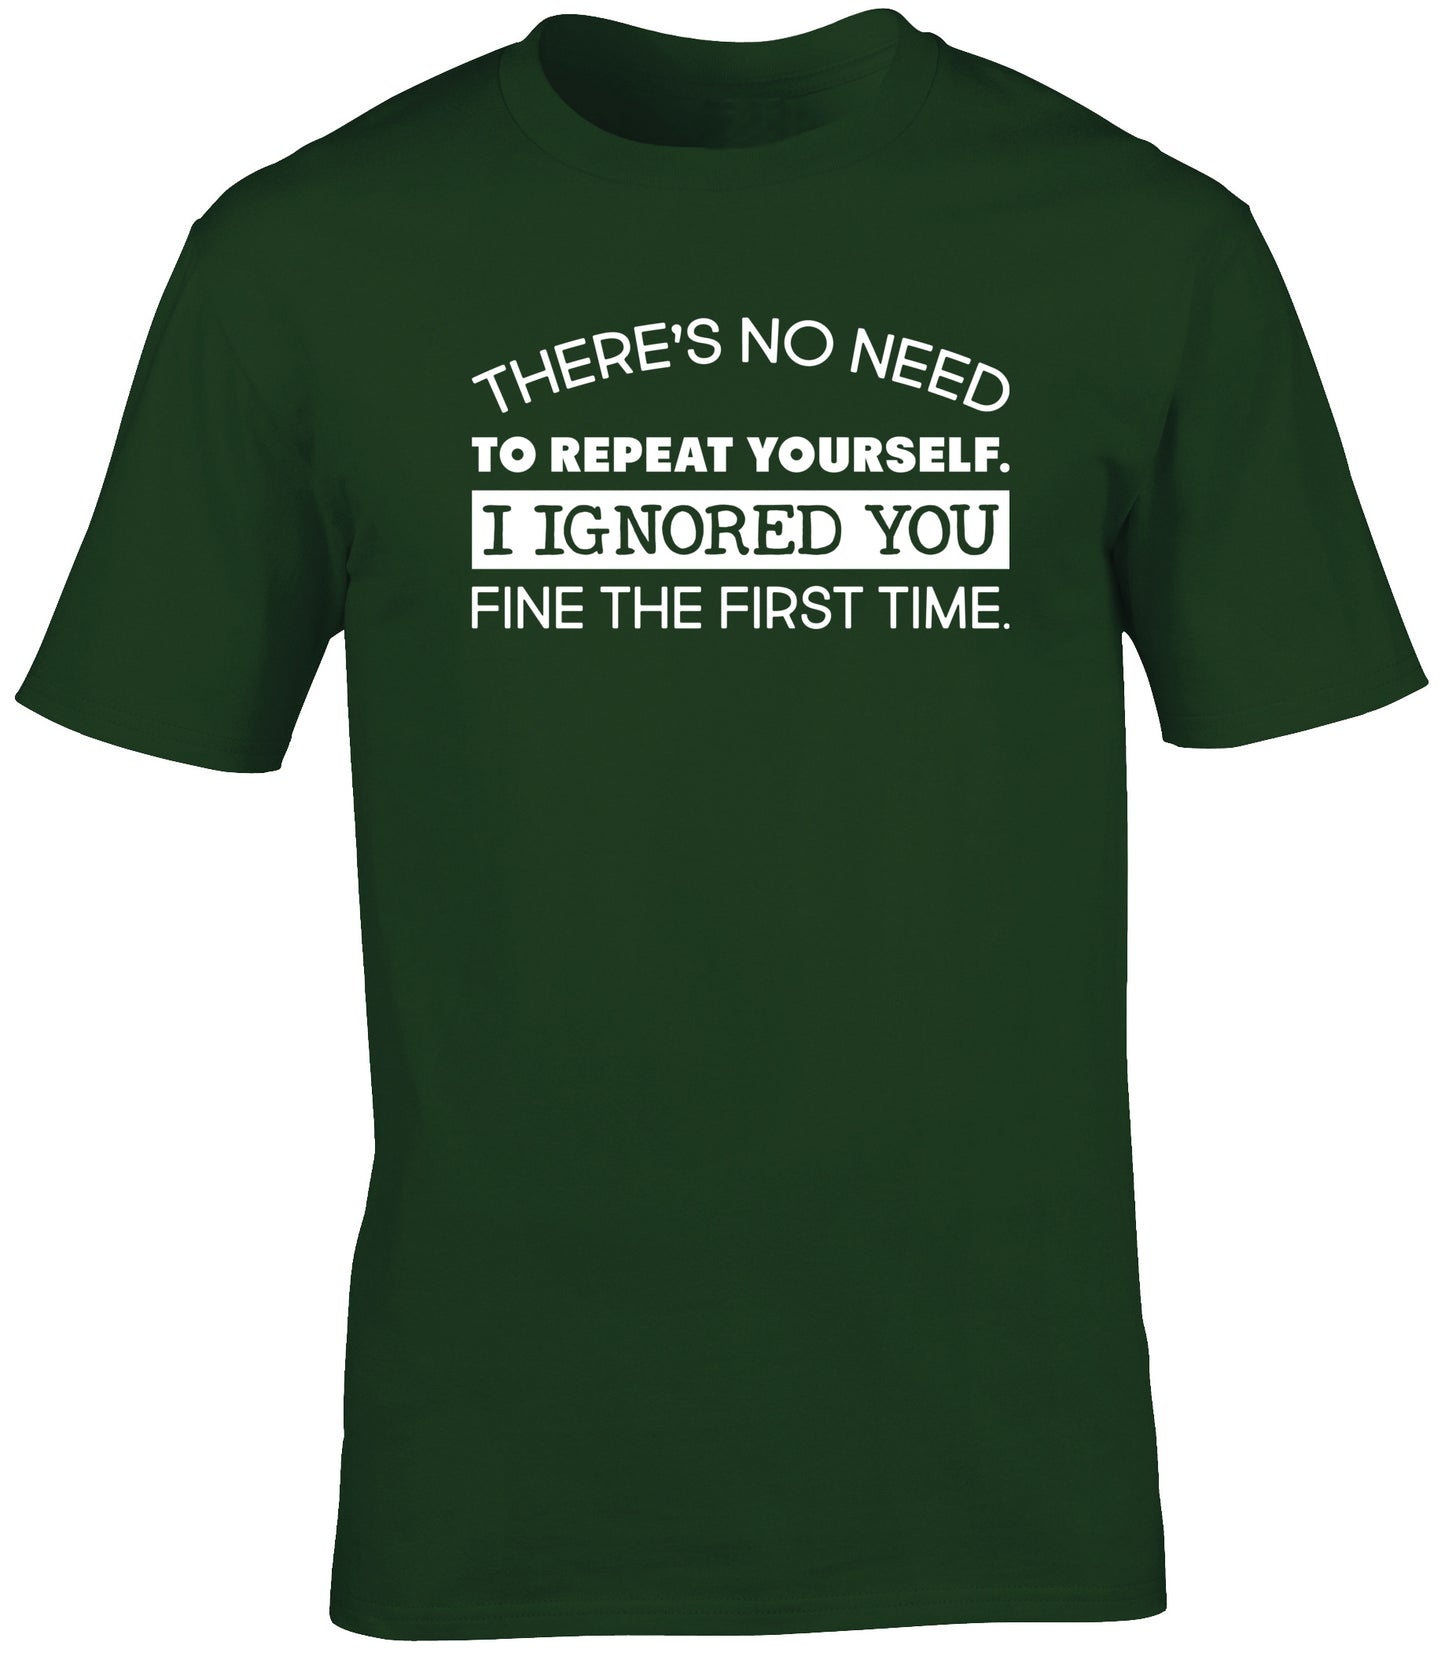 There's no need to repeat yourself. I ignored you fine the first time unisex t-shirt